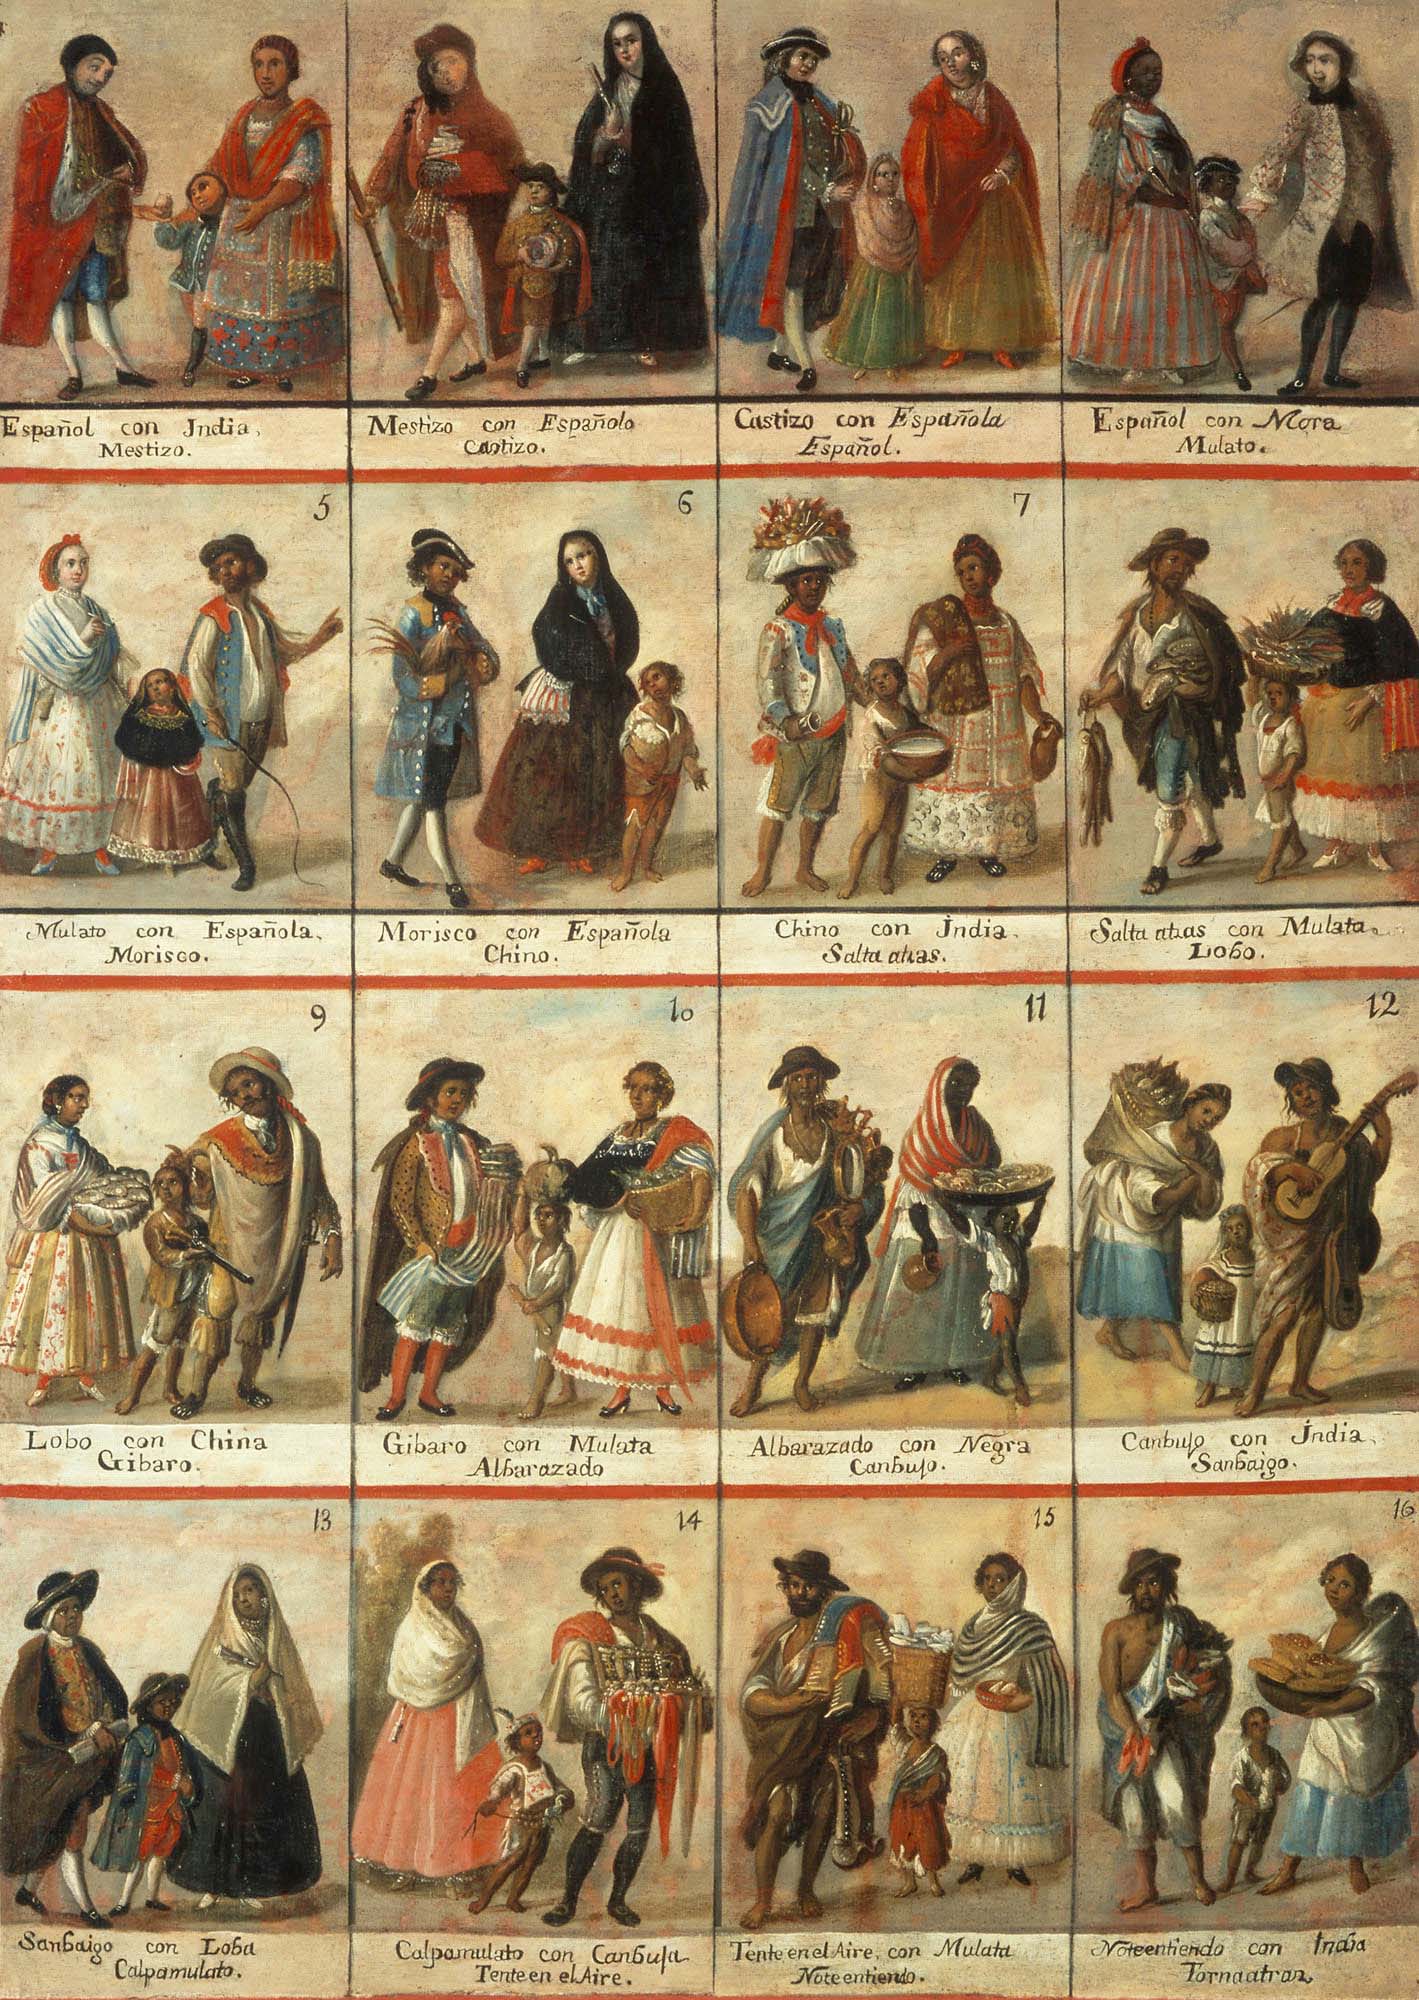 Spanish colonial racial hierarchies visualized through parents and their children. Details in text